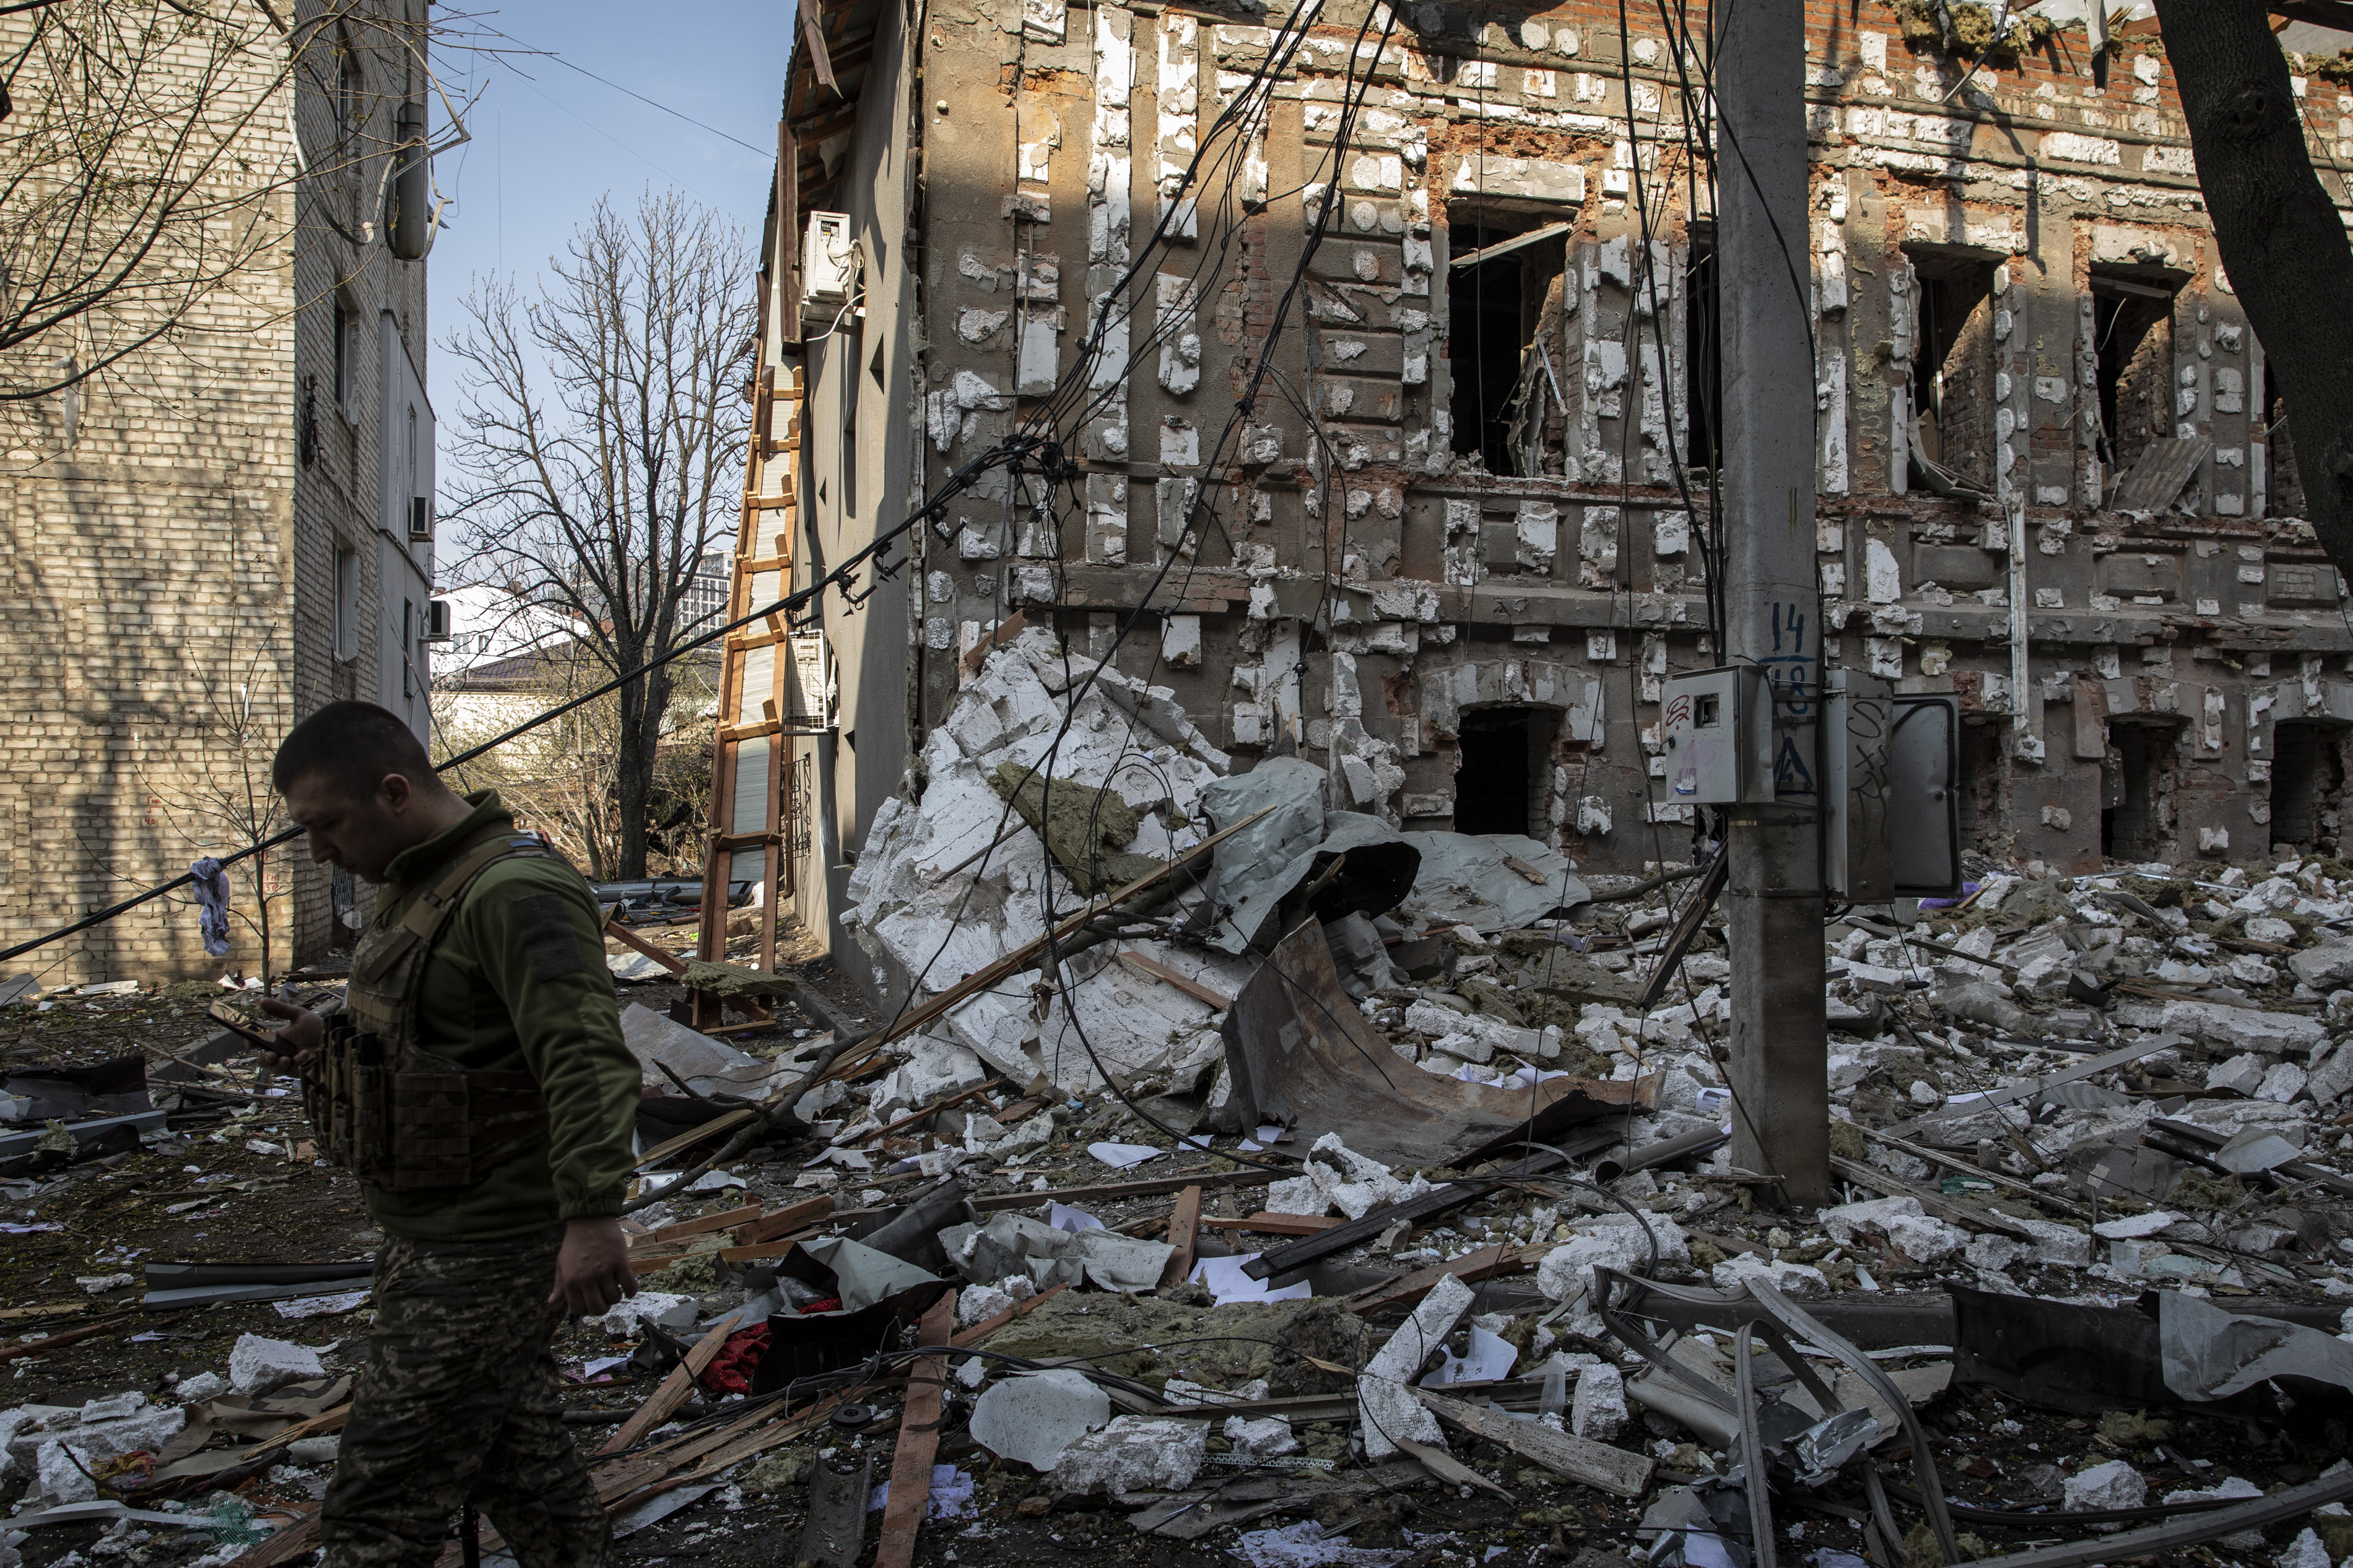 Kharkiv residents under fire: ‘I hear some shelling every hour’